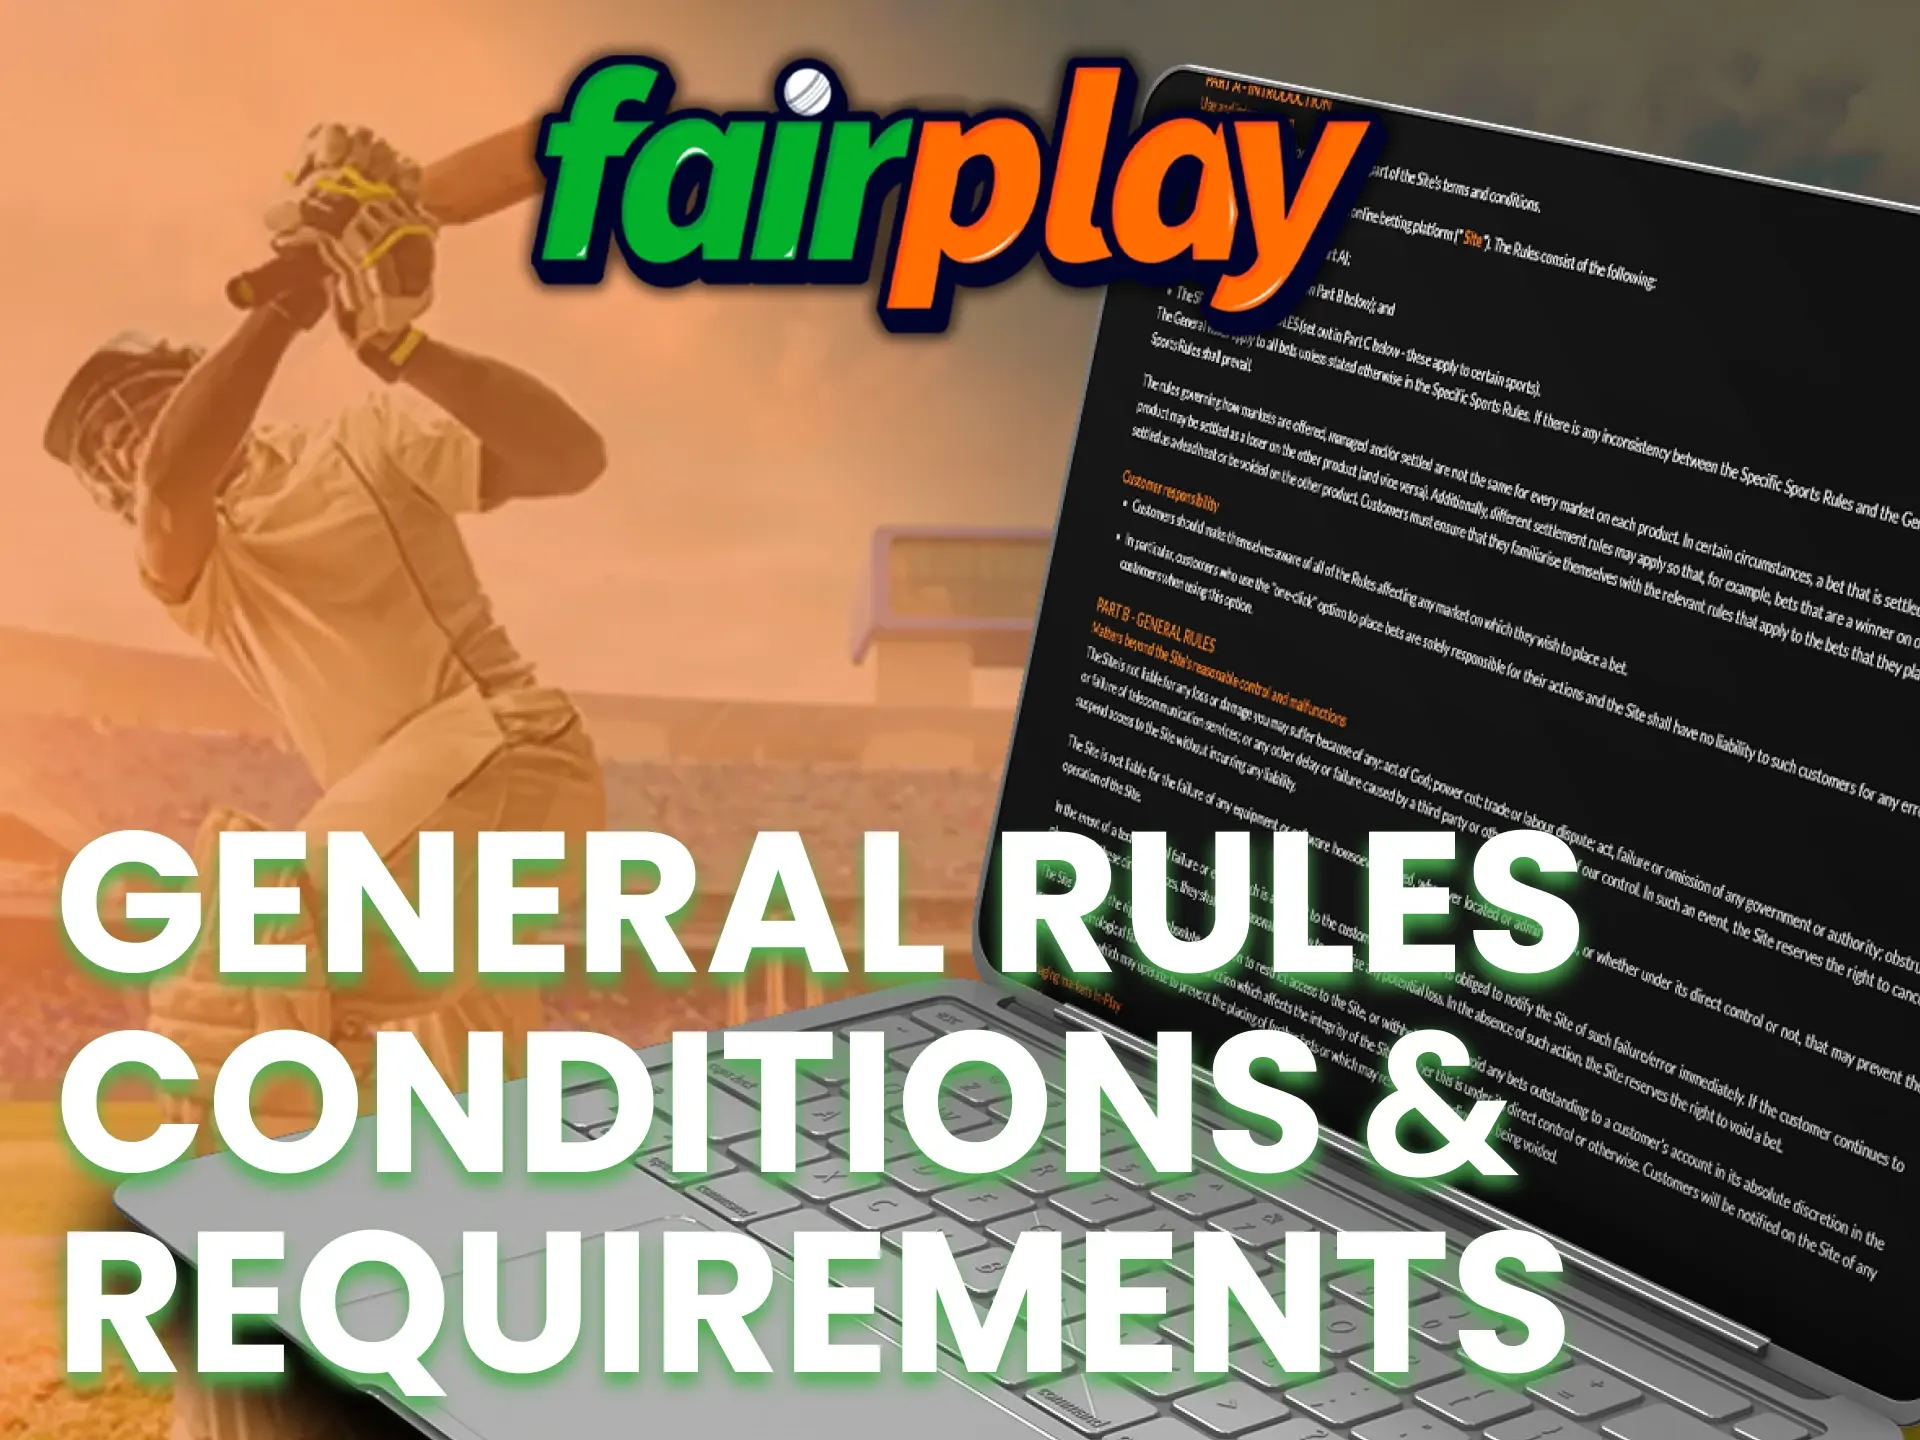 Follow Fairplay registration rules when you making new account.